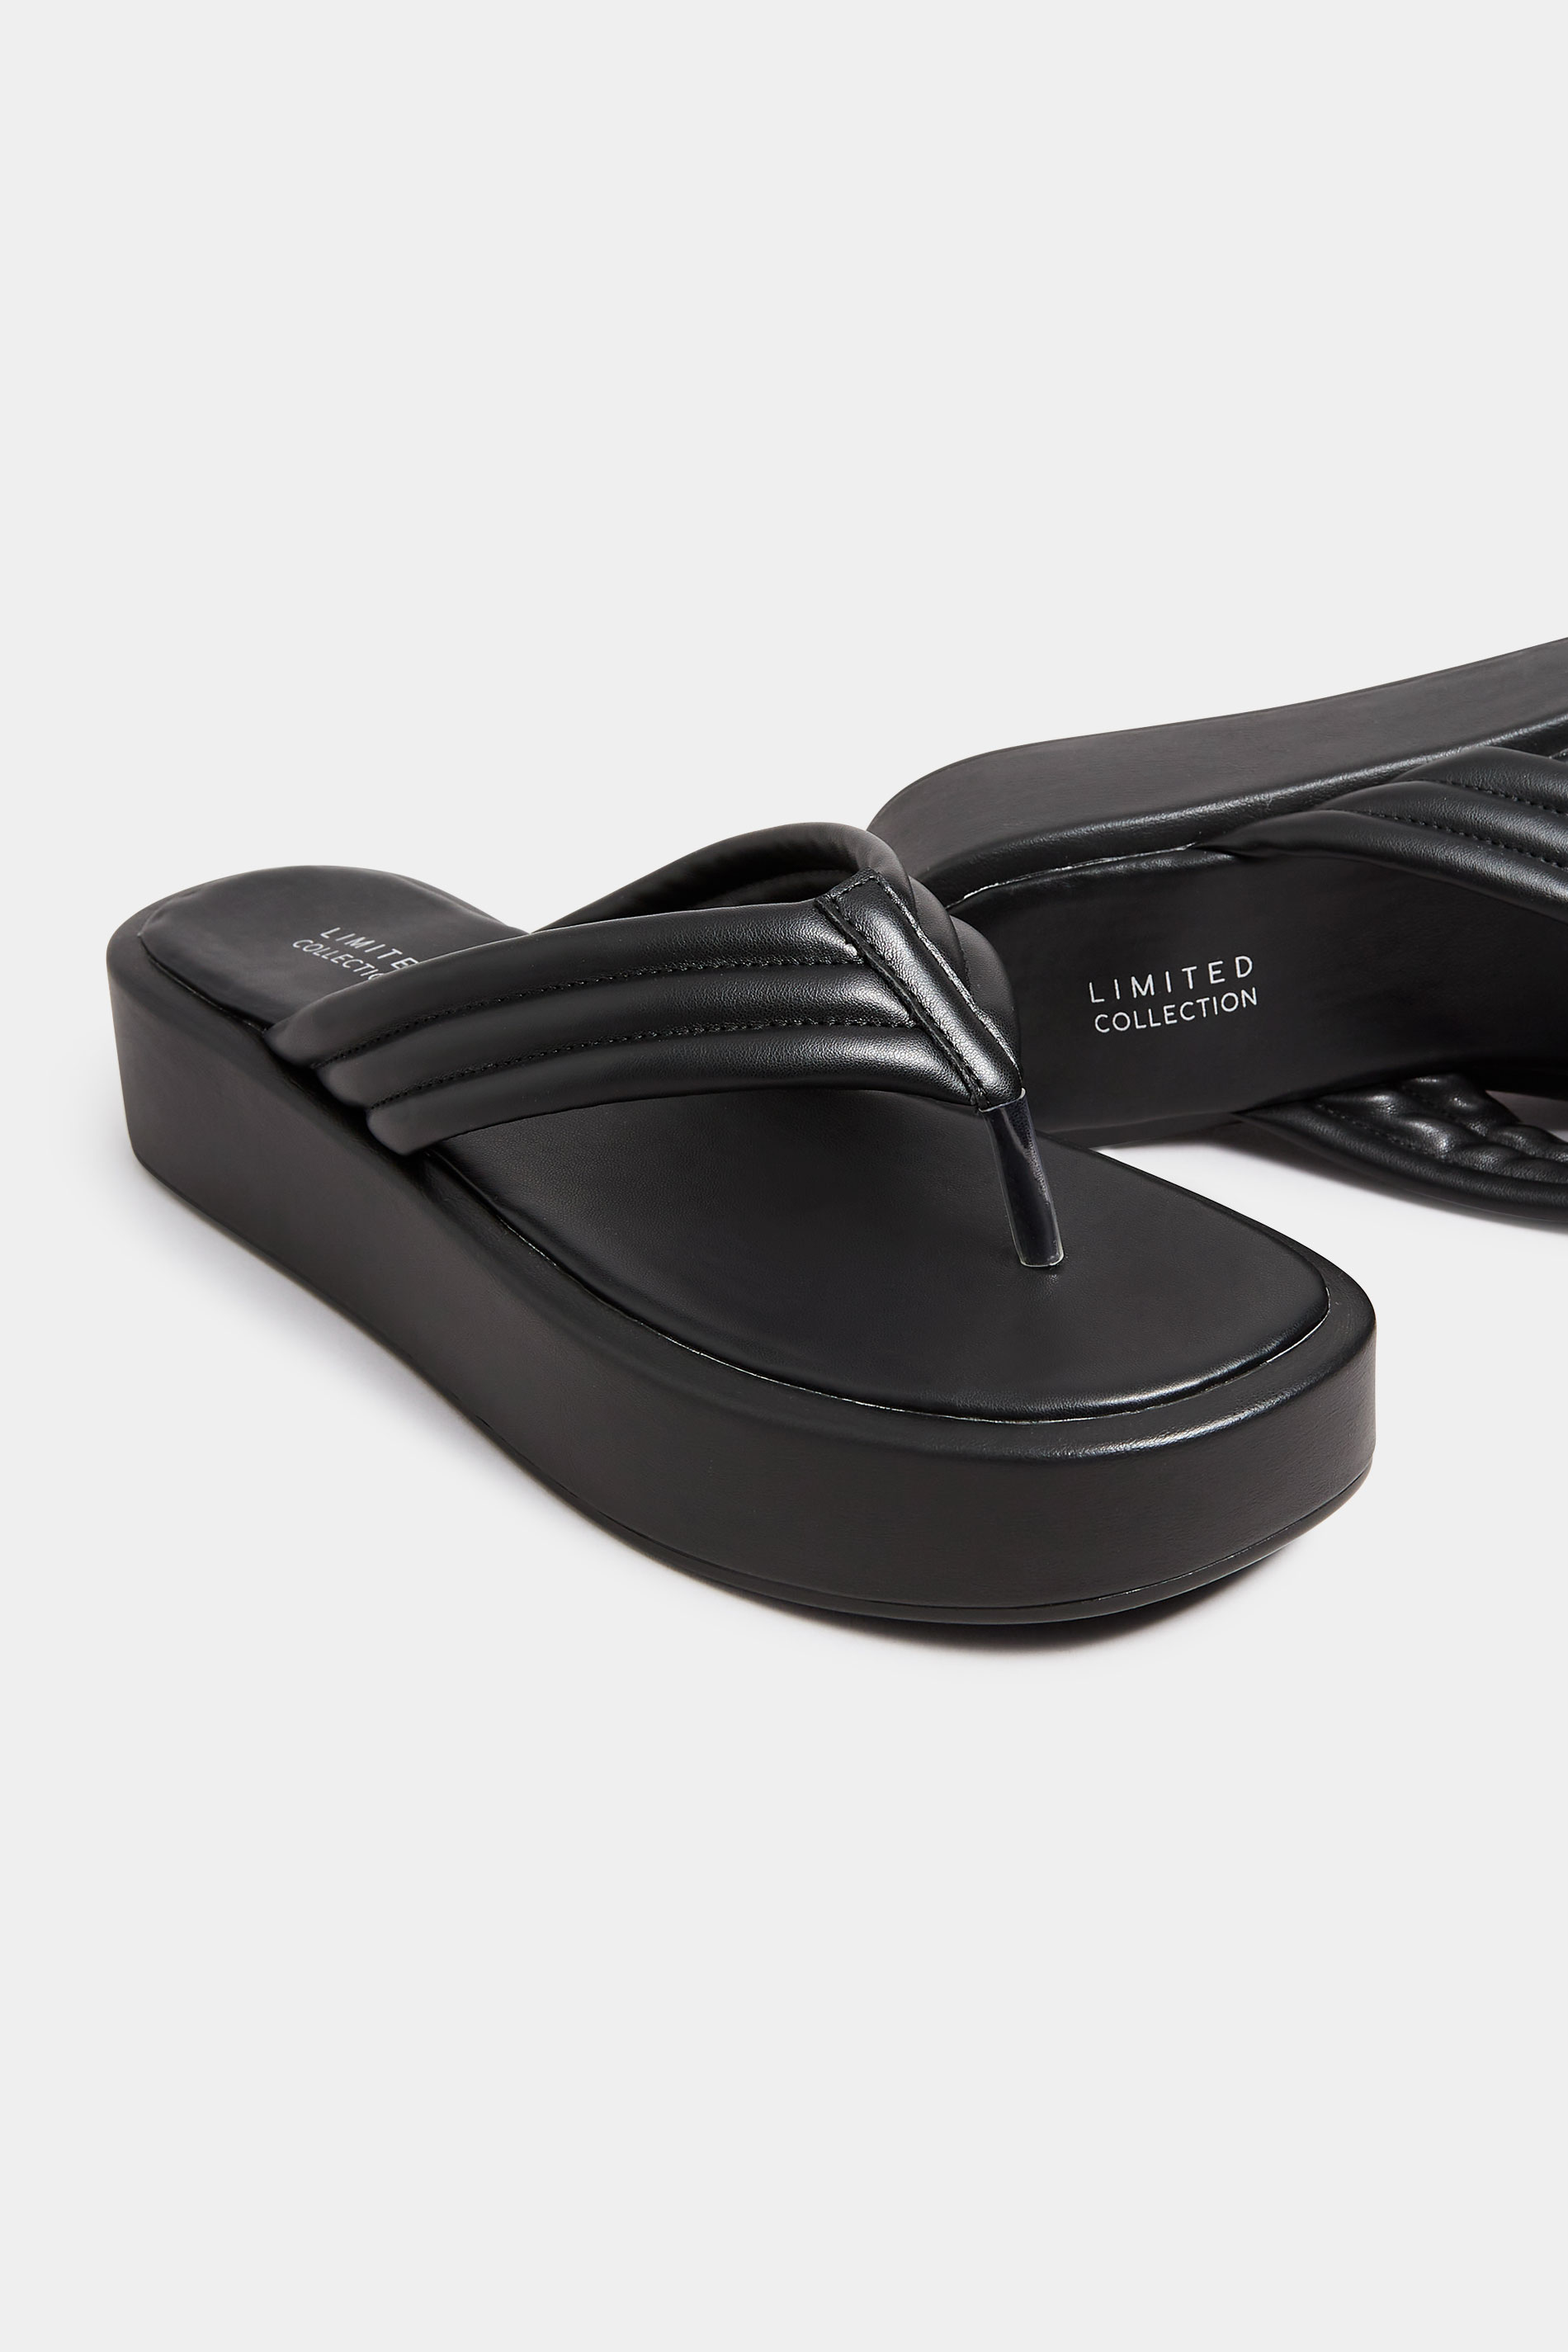 LIMITED COLLECTION Black Flatform Flip Flops In Wide E Fit | Yours Clothing